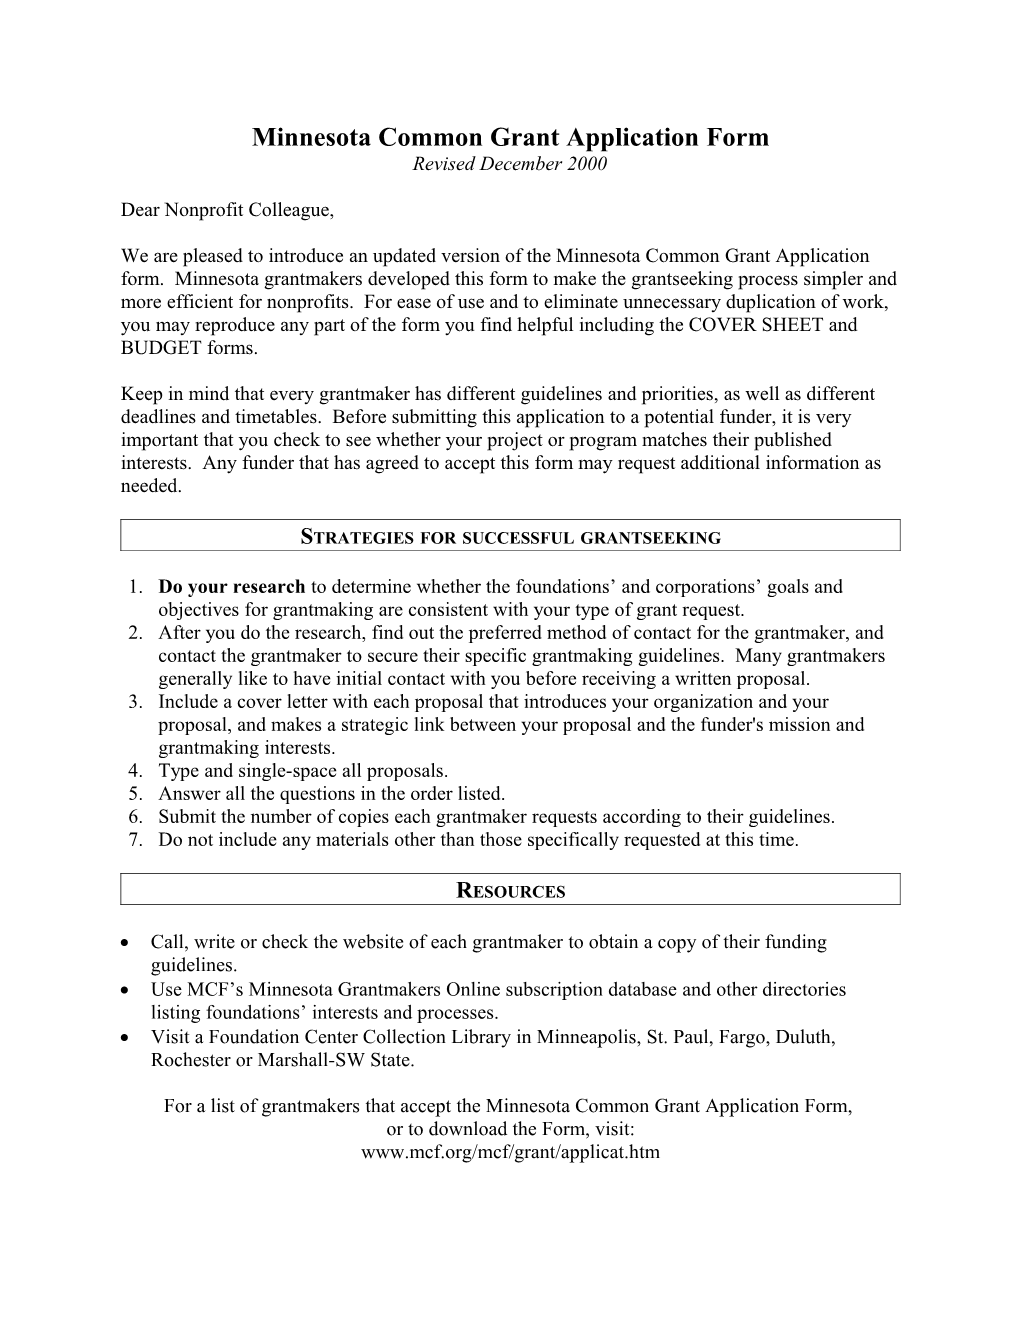 Grant Application Cover Sheet